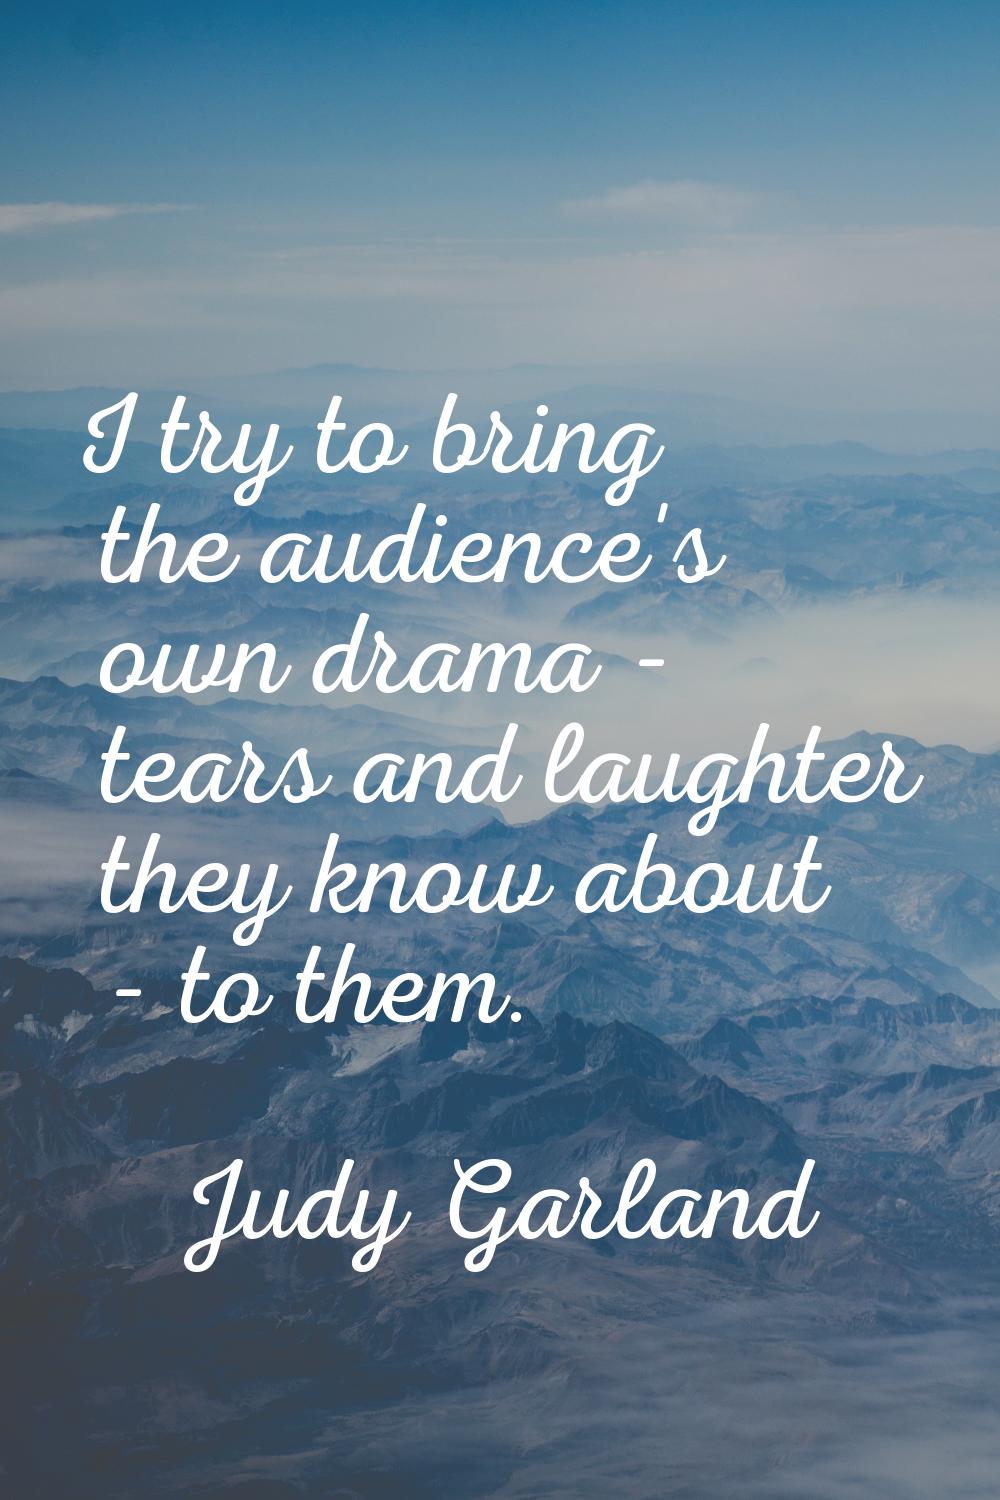 I try to bring the audience's own drama - tears and laughter they know about - to them.